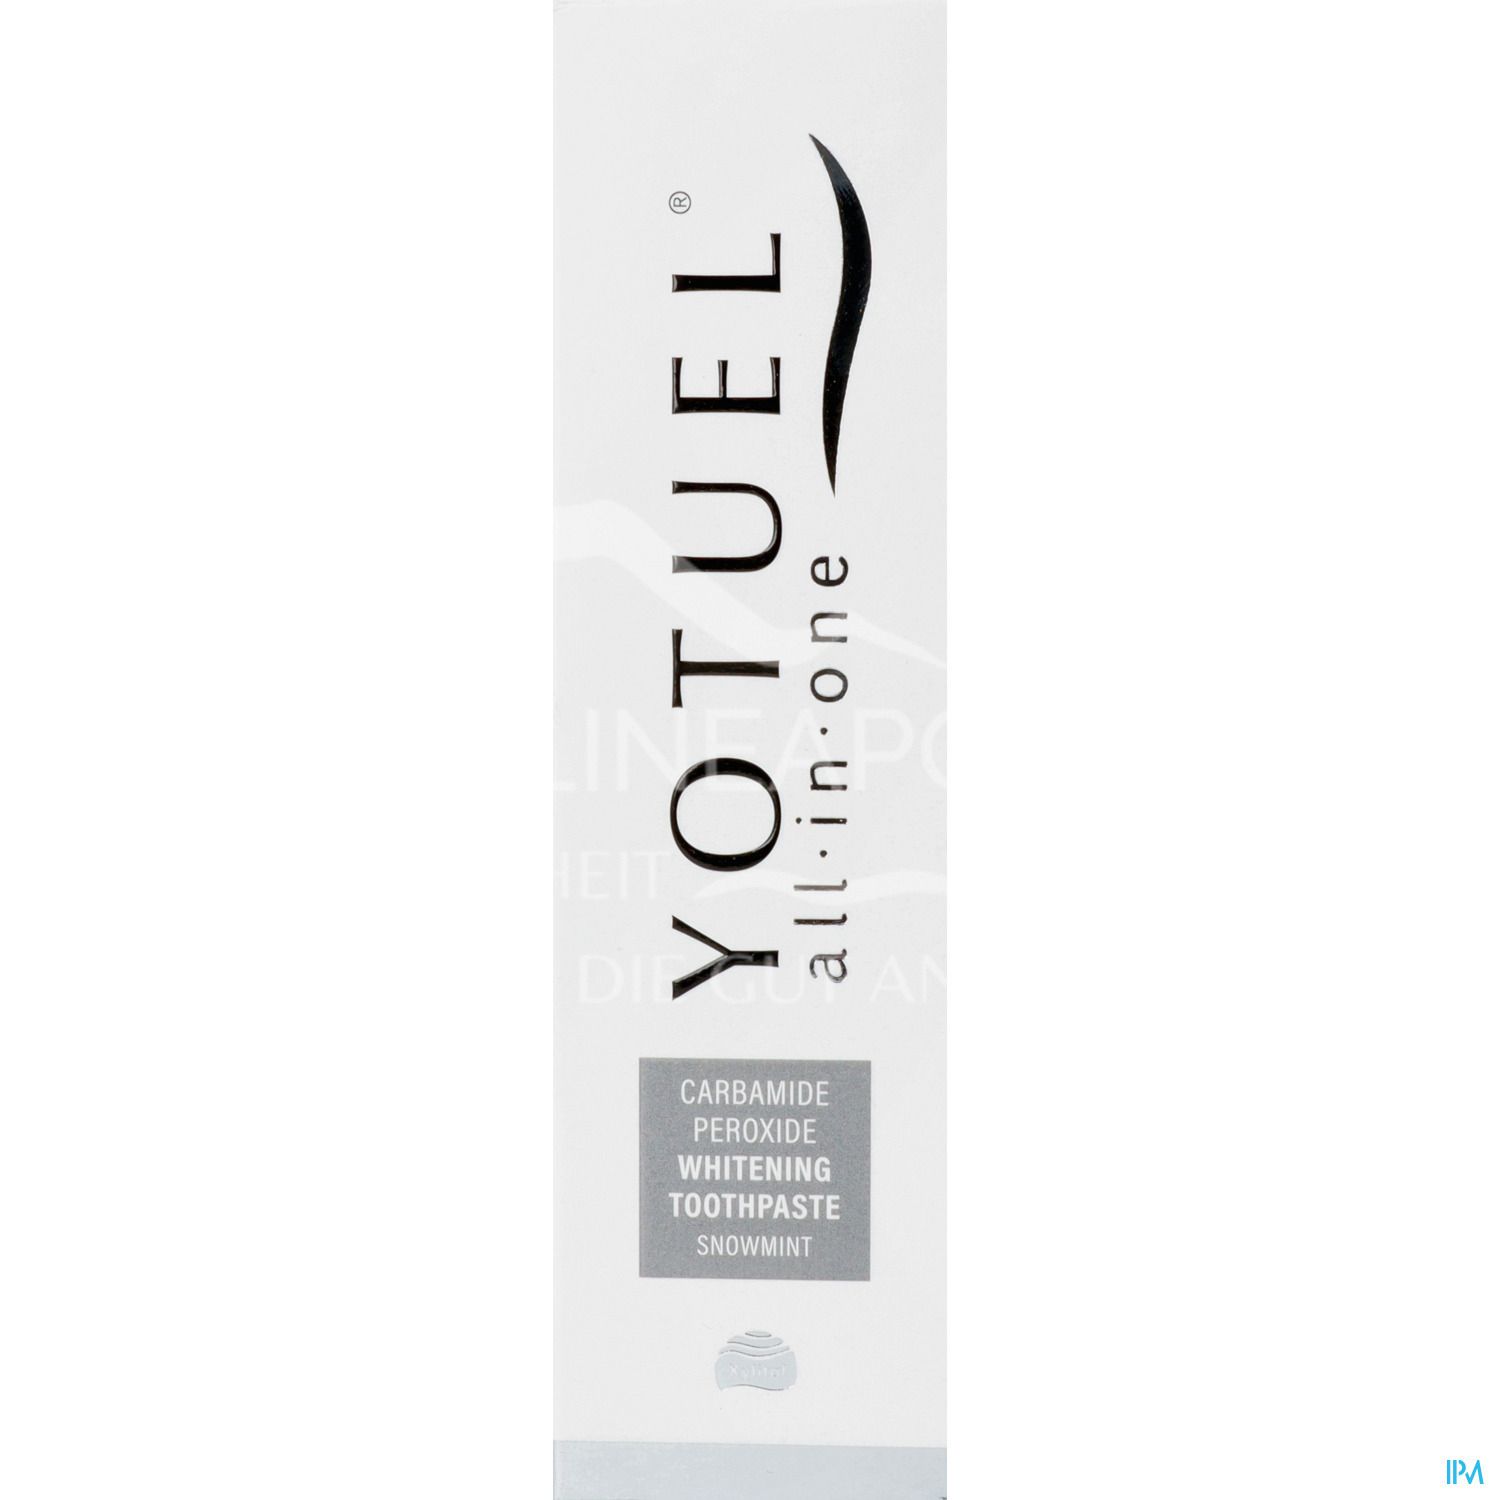 YOTUEL all-in-one Carbamide Peroxide Whitening Zahnpasta Snowmint